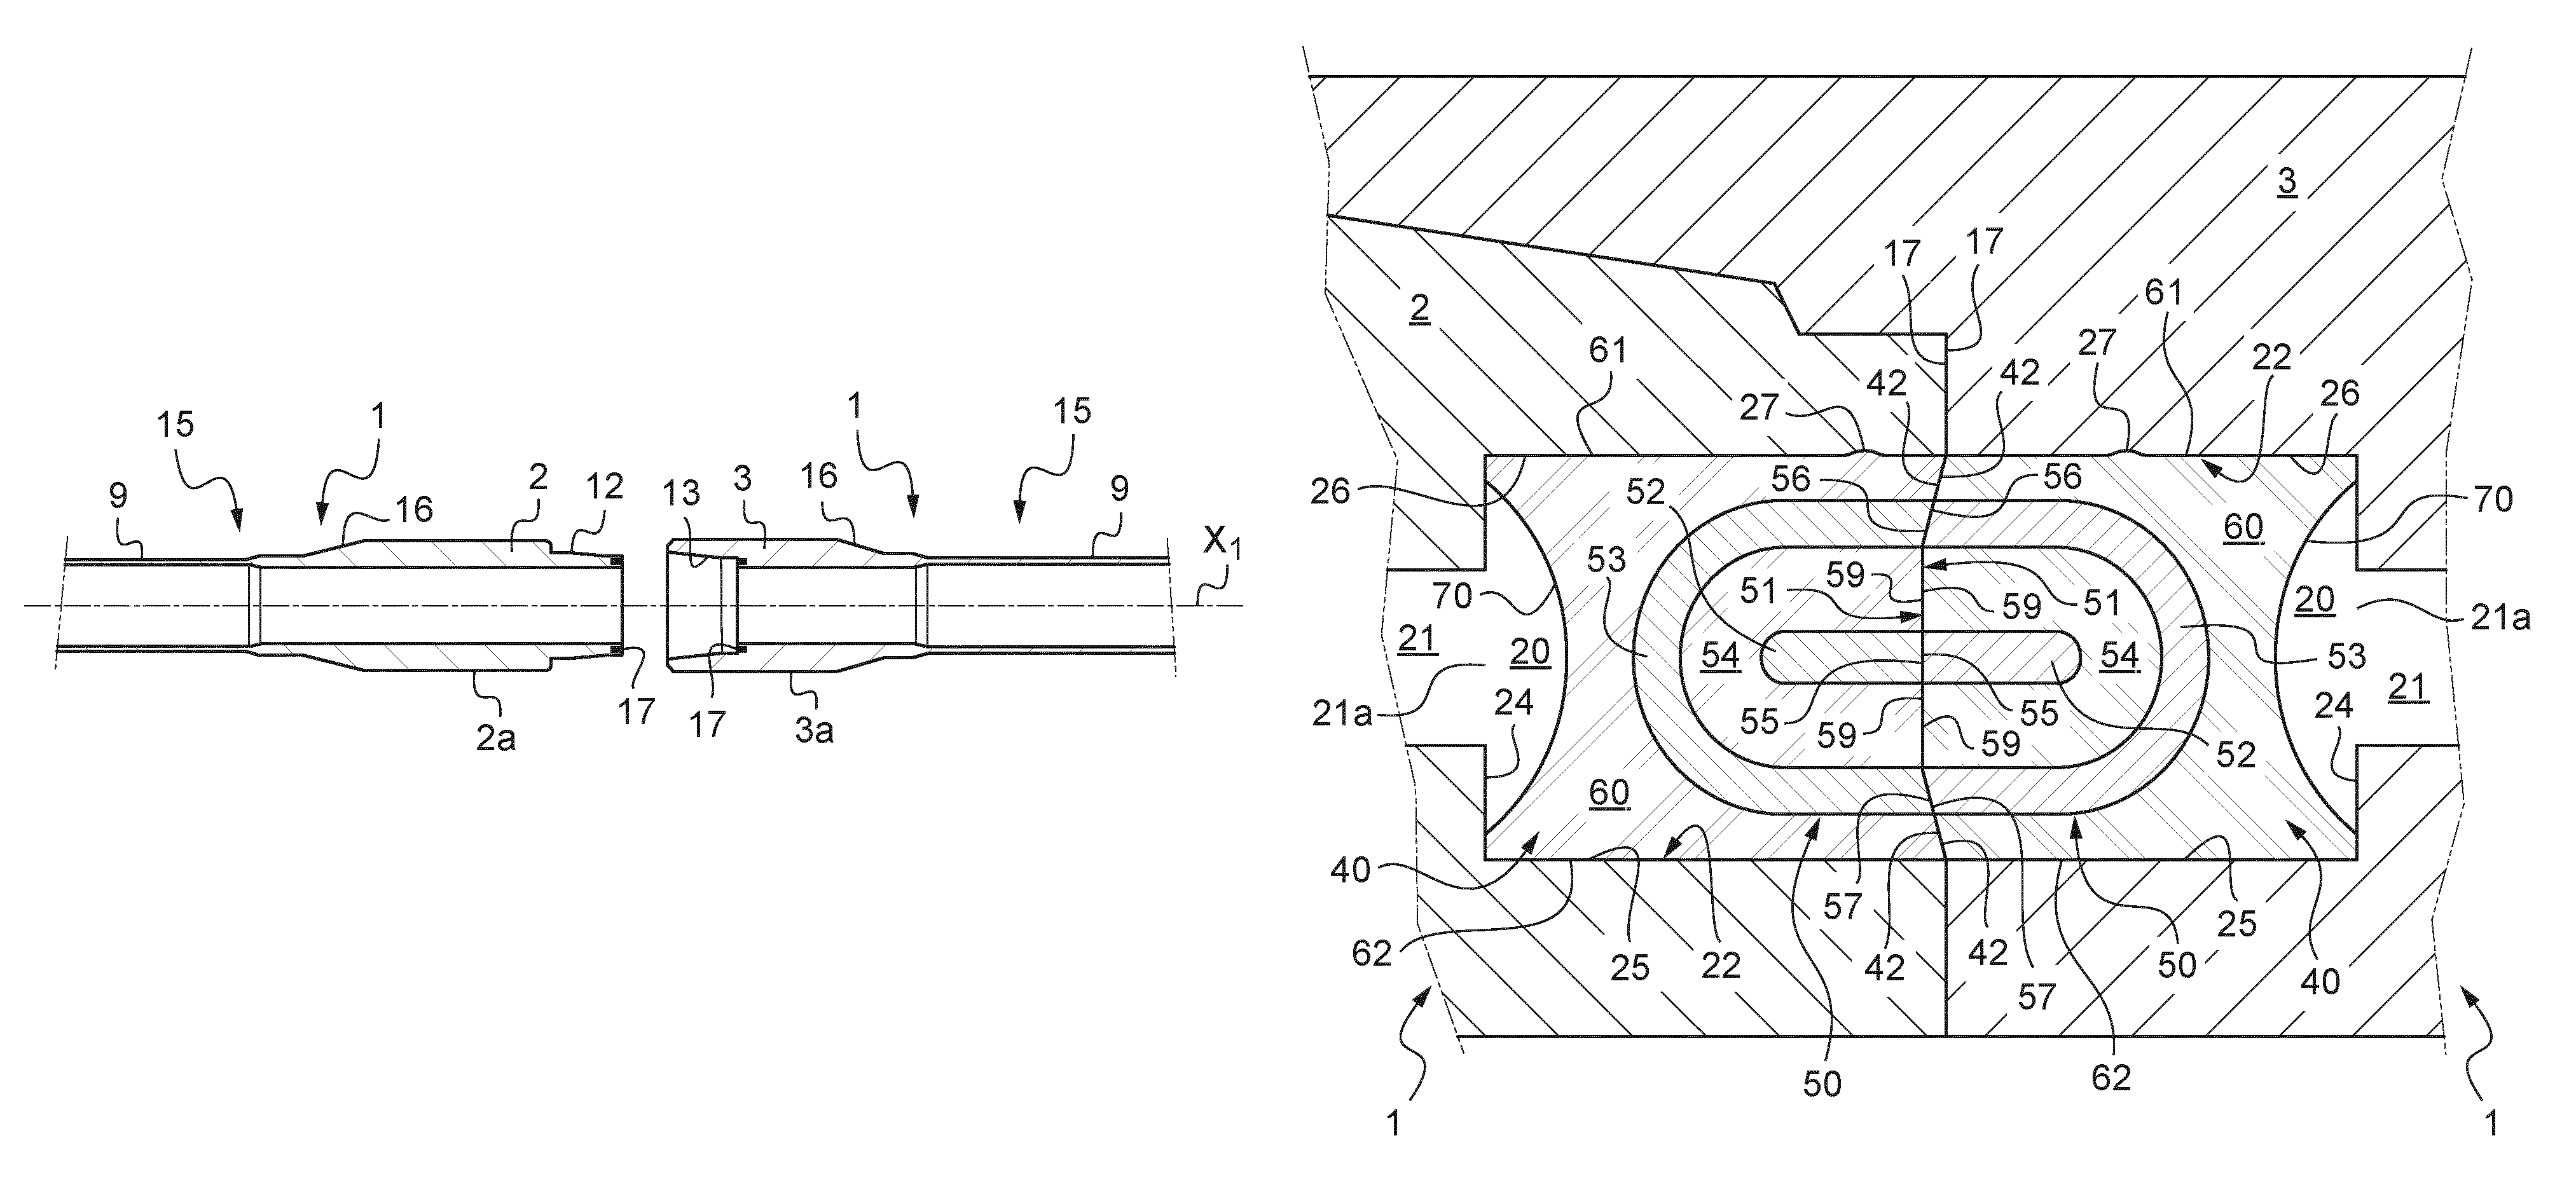 Drill stem component comprising a movable coupler and a pressure chamber